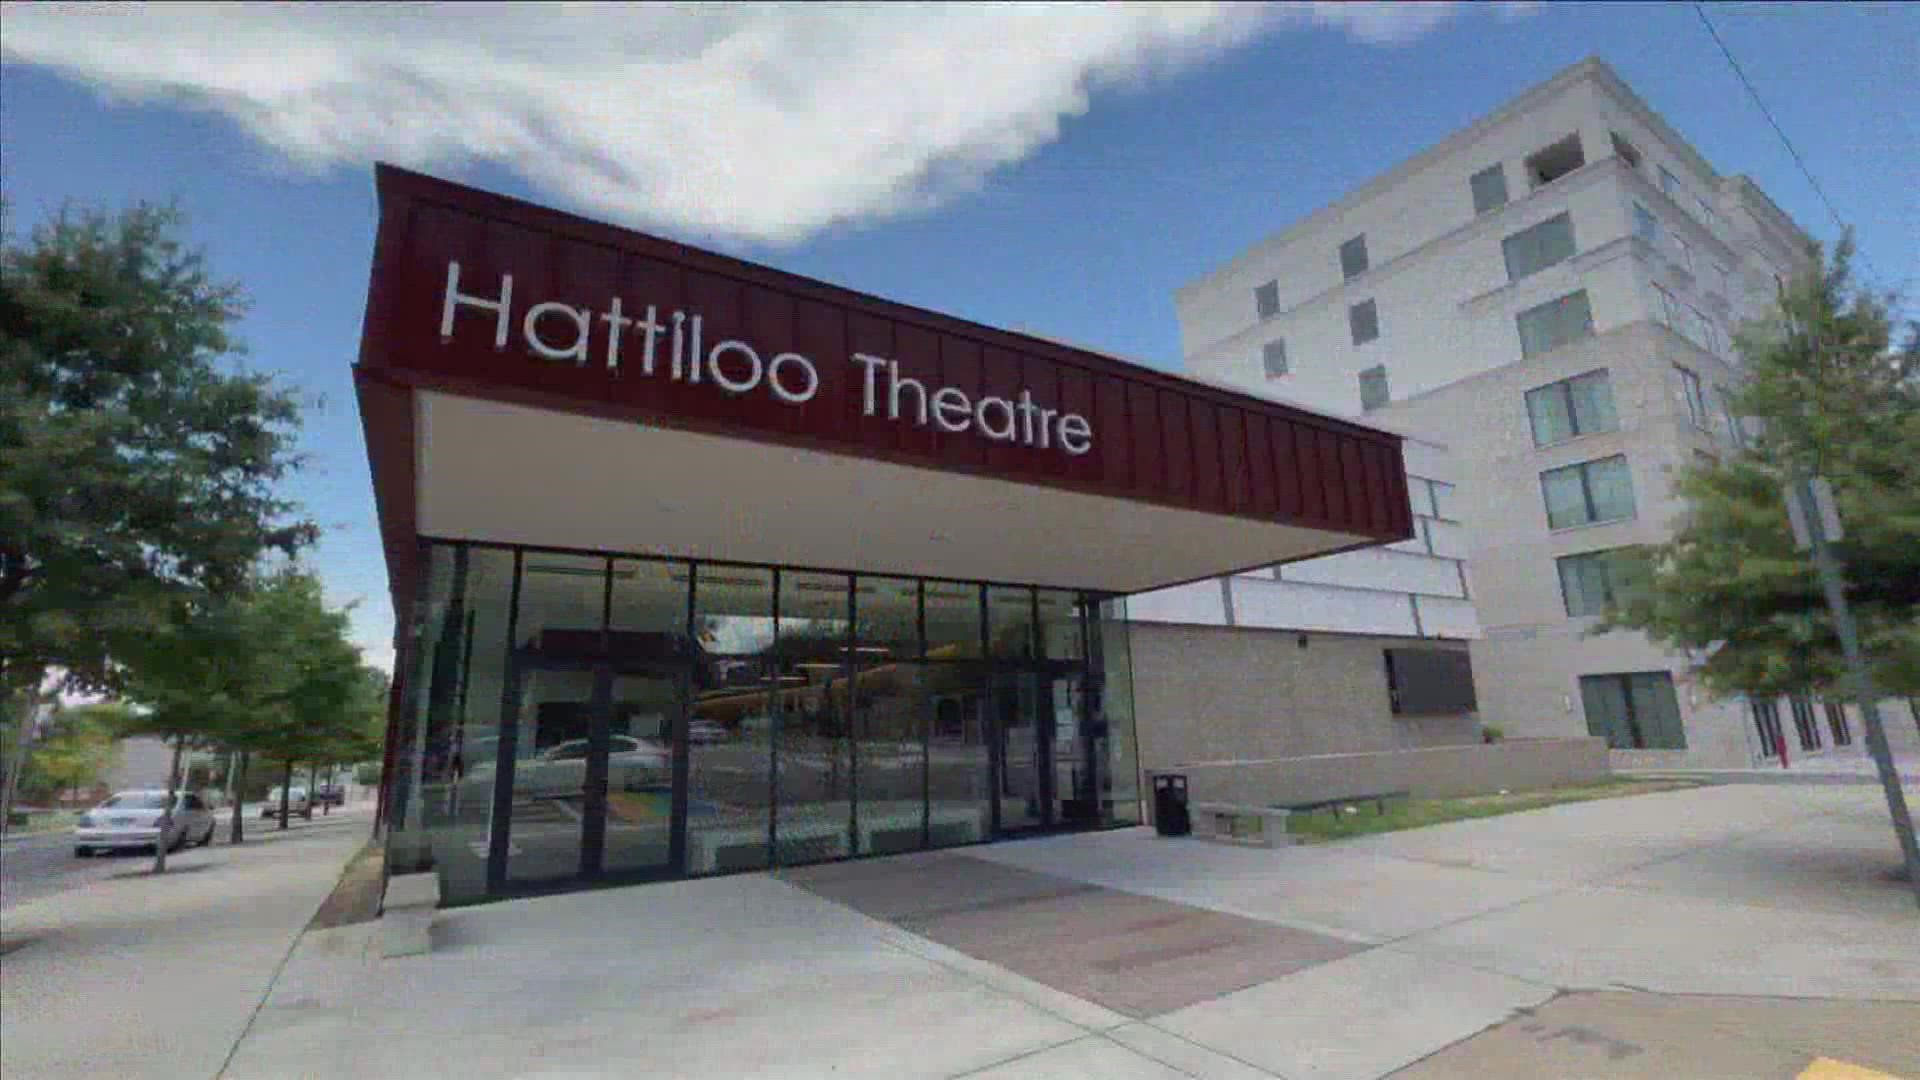 The Hattiloo Theatre in midtown Memphis says it plans to open a tuition-free school for at-risk students and other groups in a historic church.